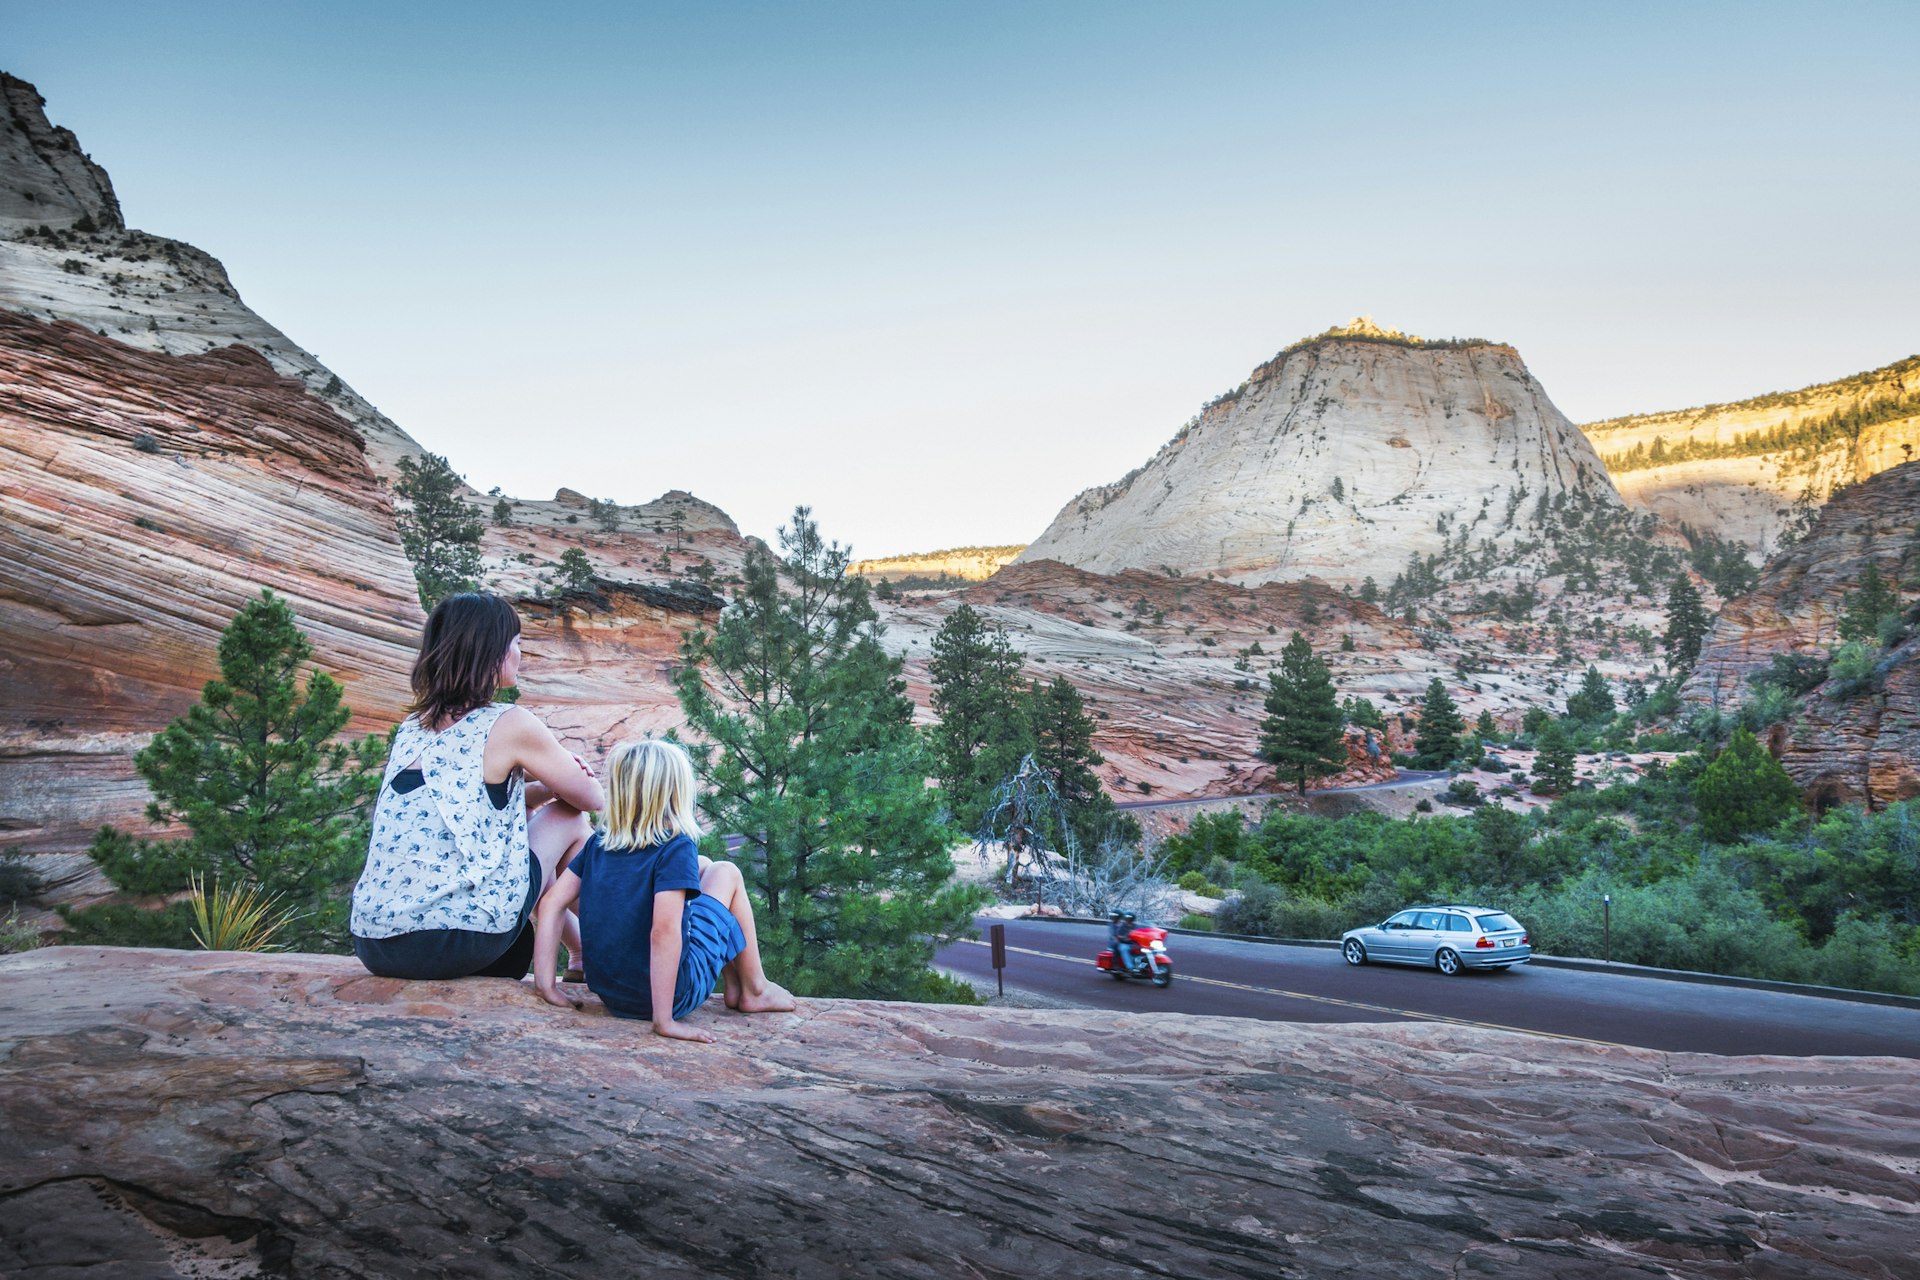 A woman and a child sit on the rocks above a red rock landscape as a car and motorbike drive by